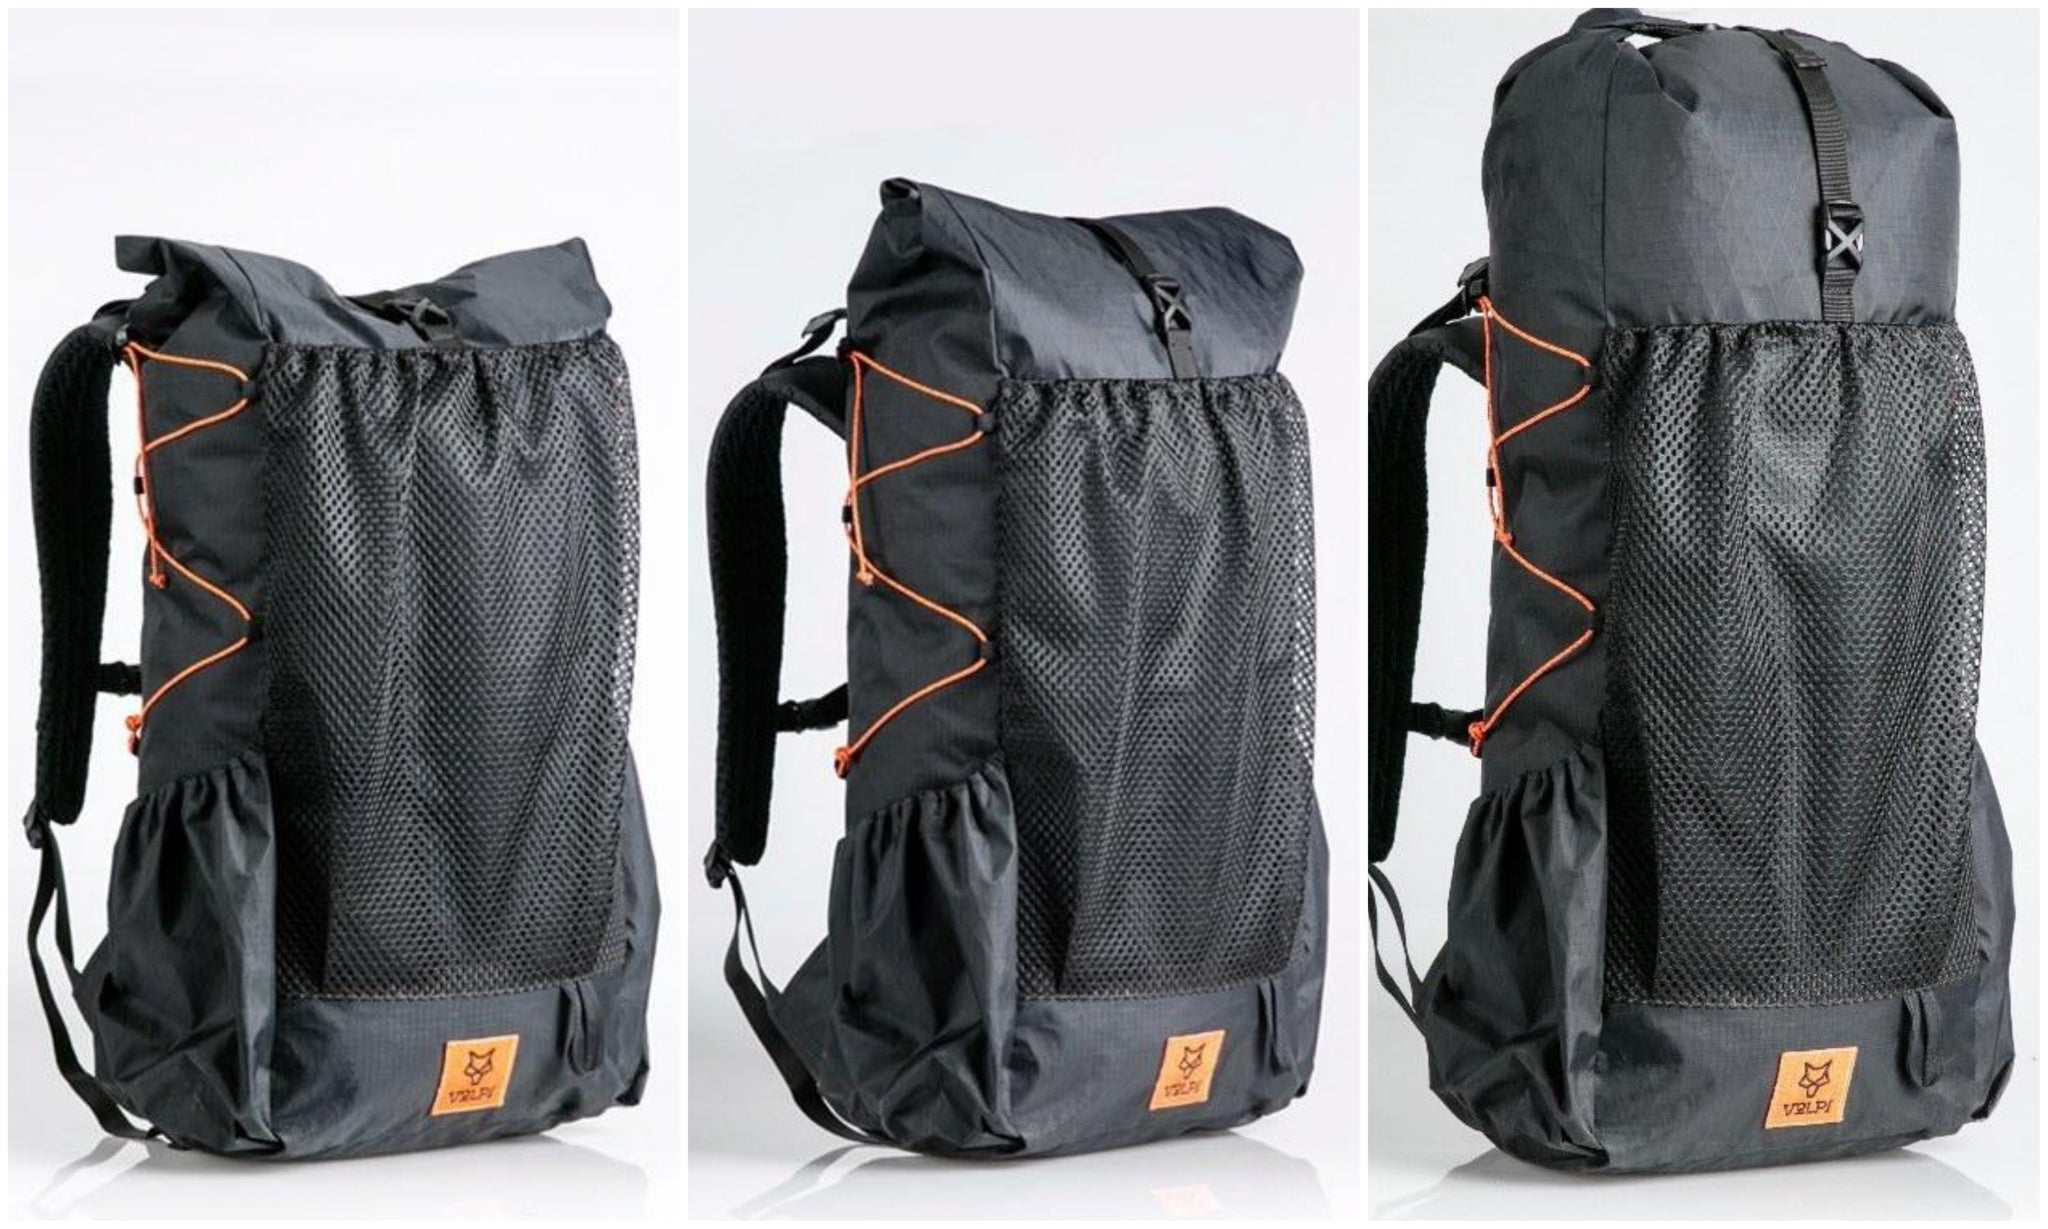 Volpi Ultralight 45 Pack Review UL Lightweight Backpacking Kit